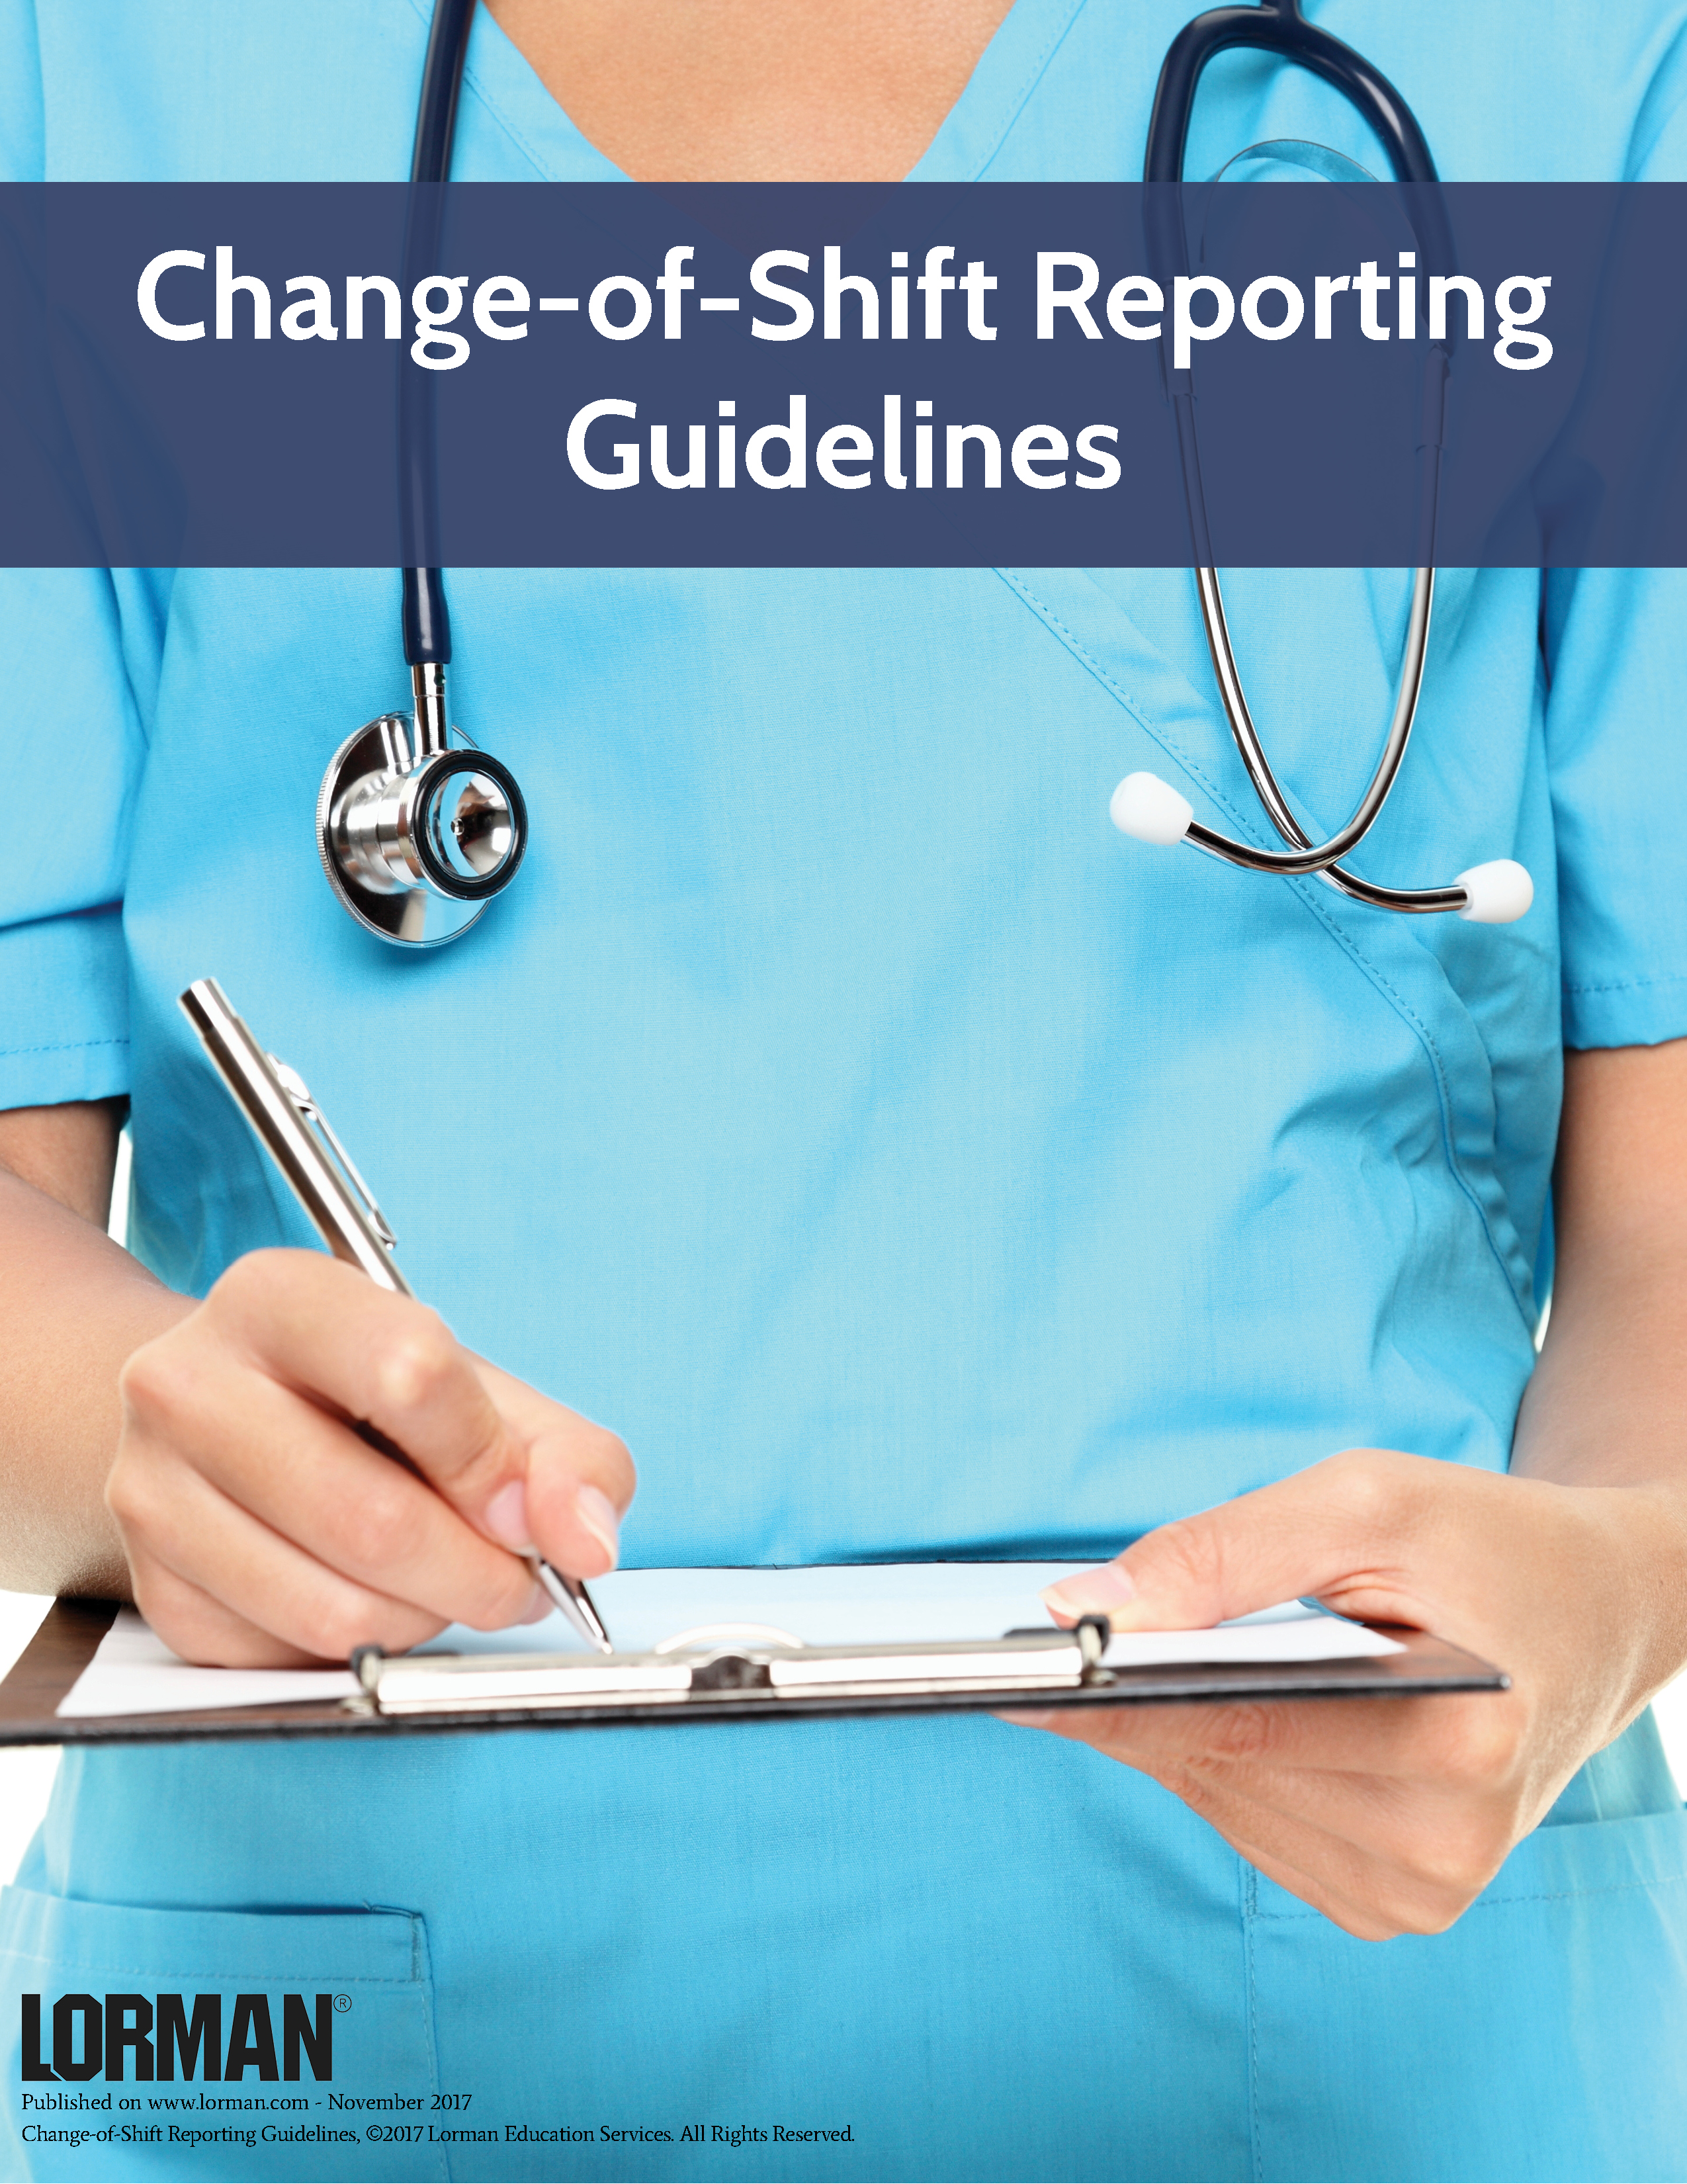 Change-of-Shift Reporting Guidelines